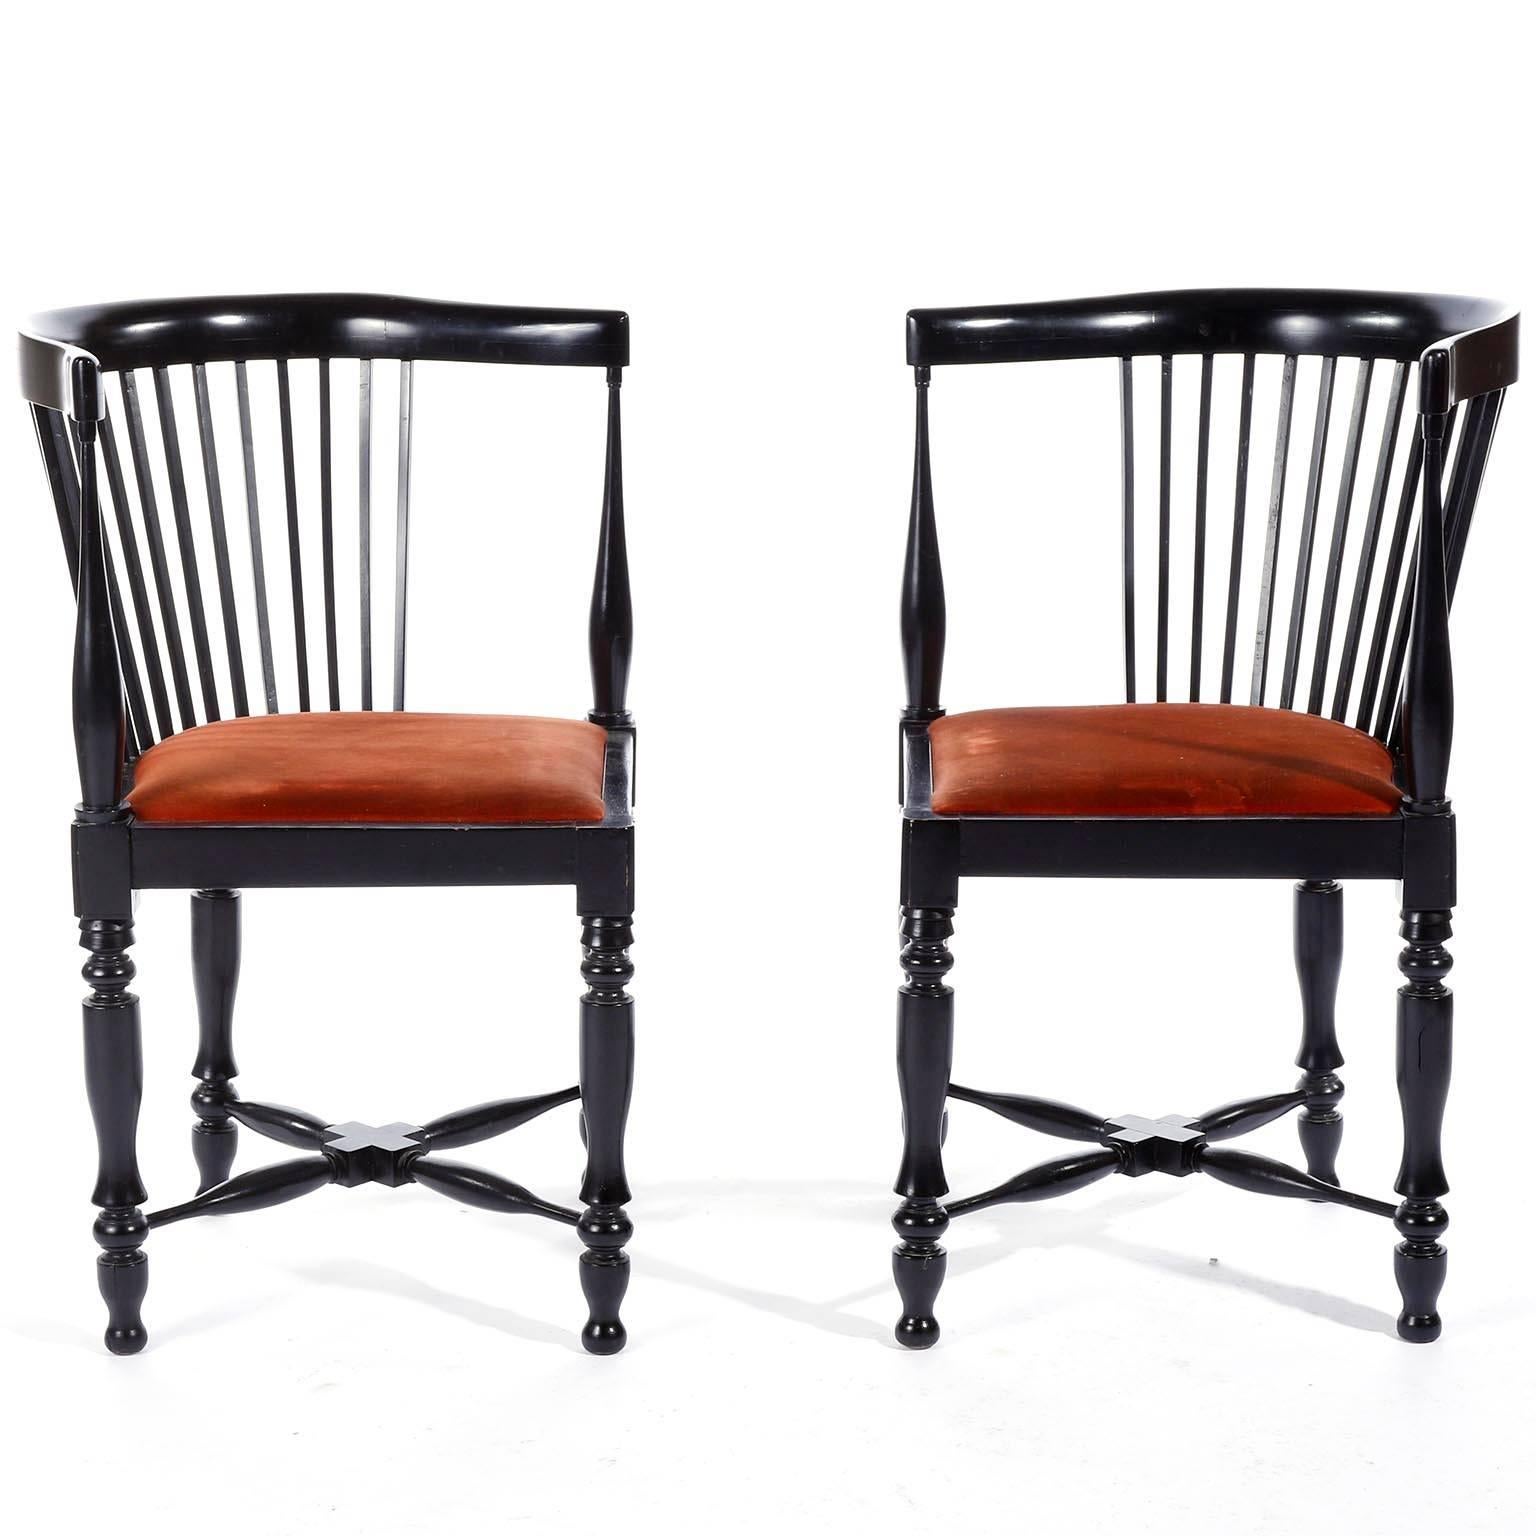 A pair of extremely rare corner armchairs designed by Adolf Loos (1870-1933) and manufactured by Friedrich Otto Schmidt, Vienna, Austria, circa 1900.

The condition is very good. The chairs have been restored in the past. There is minor wear on wood